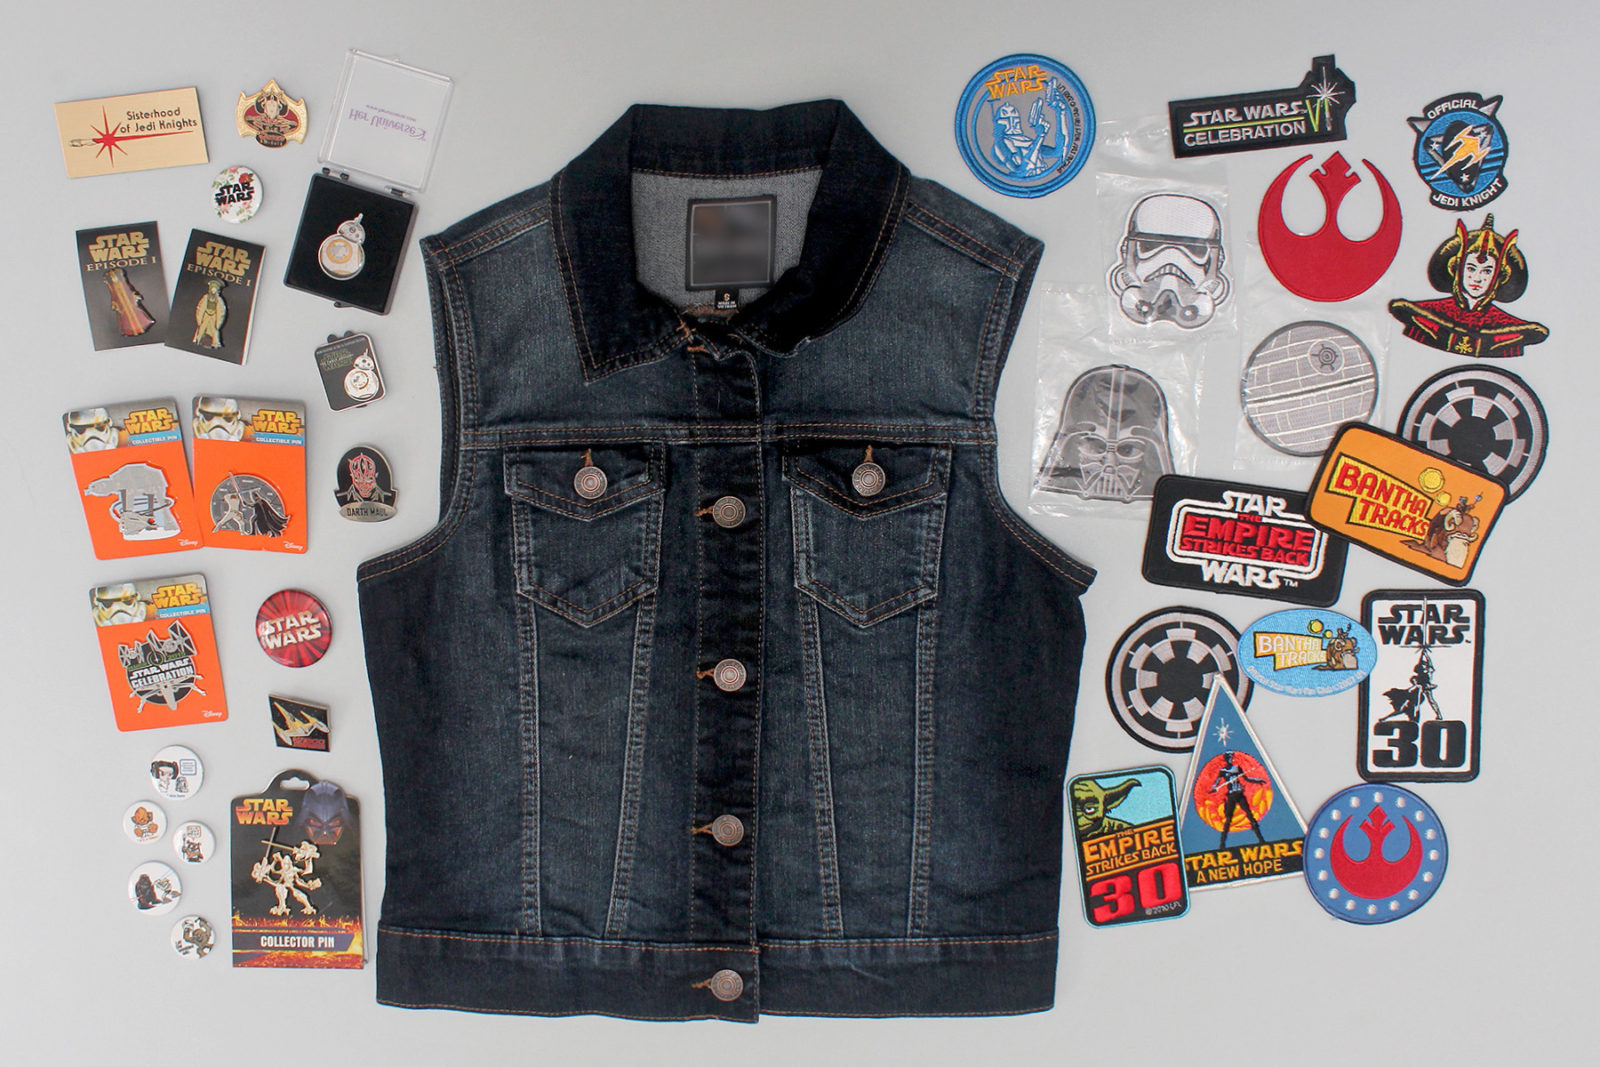 Styling pins and patches